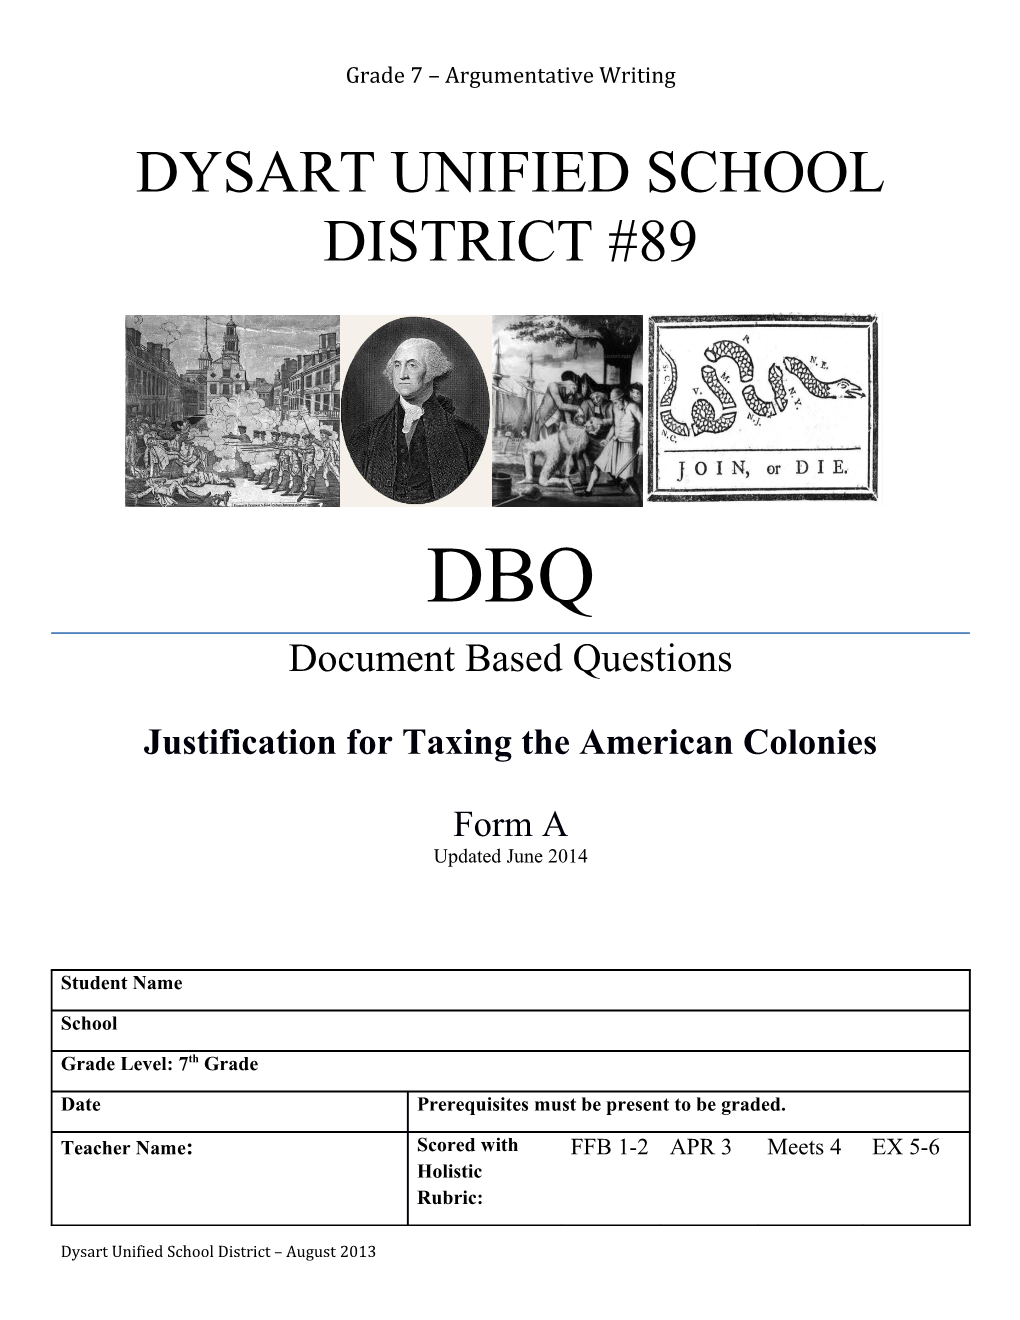 DBQ Rubric As Adopted for the 6Th, 7Th and 8Th Grade Social Studies